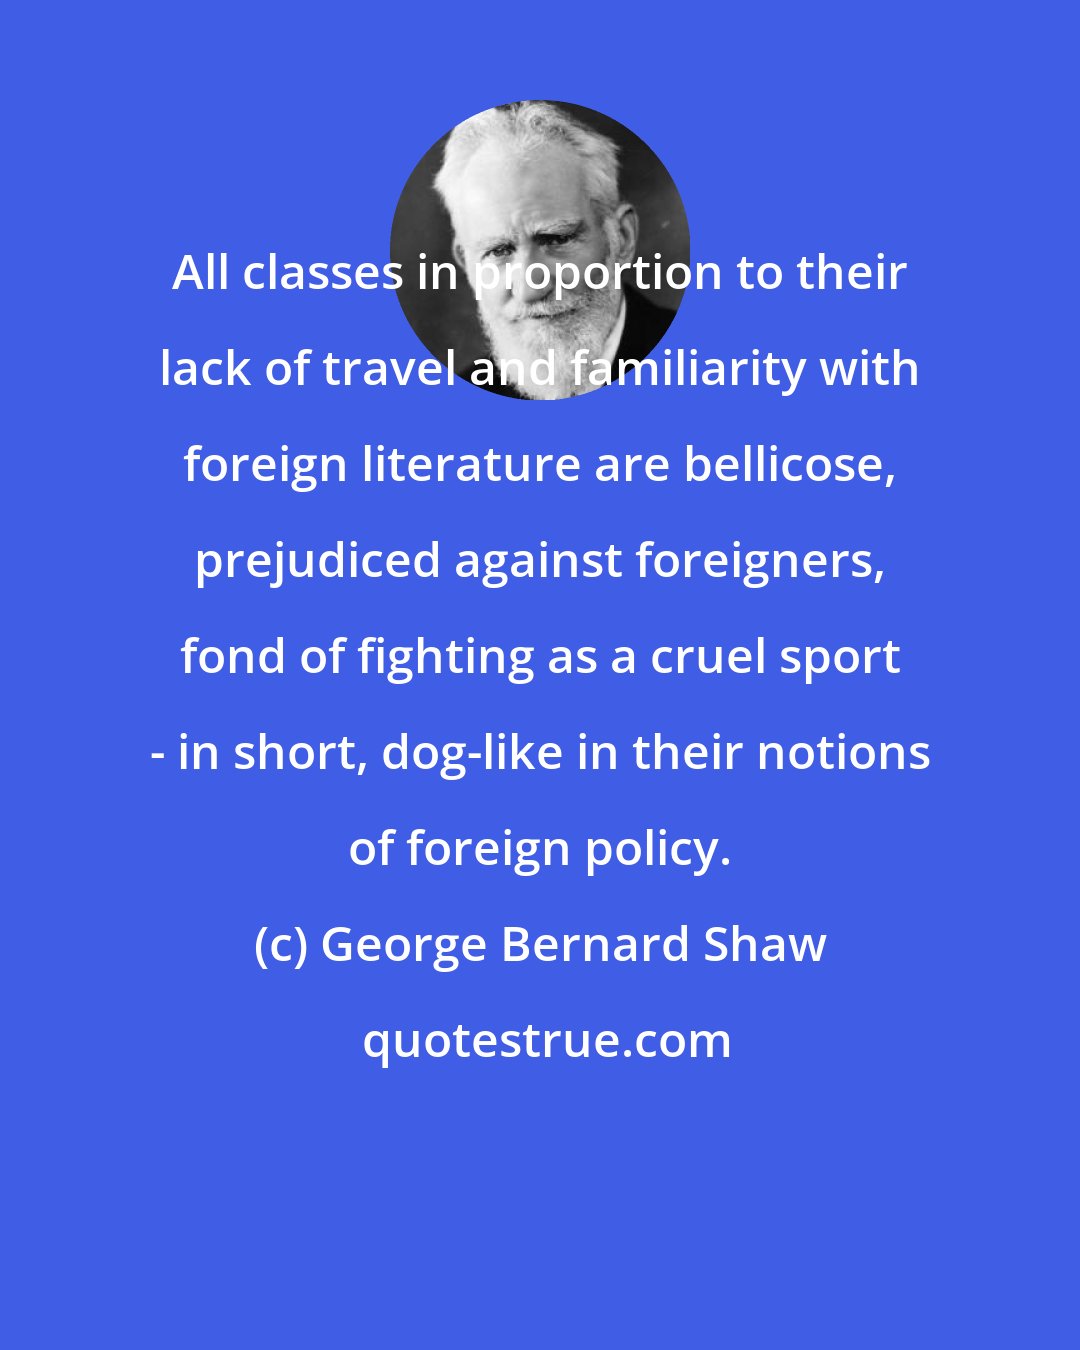 George Bernard Shaw: All classes in proportion to their lack of travel and familiarity with foreign literature are bellicose, prejudiced against foreigners, fond of fighting as a cruel sport - in short, dog-like in their notions of foreign policy.